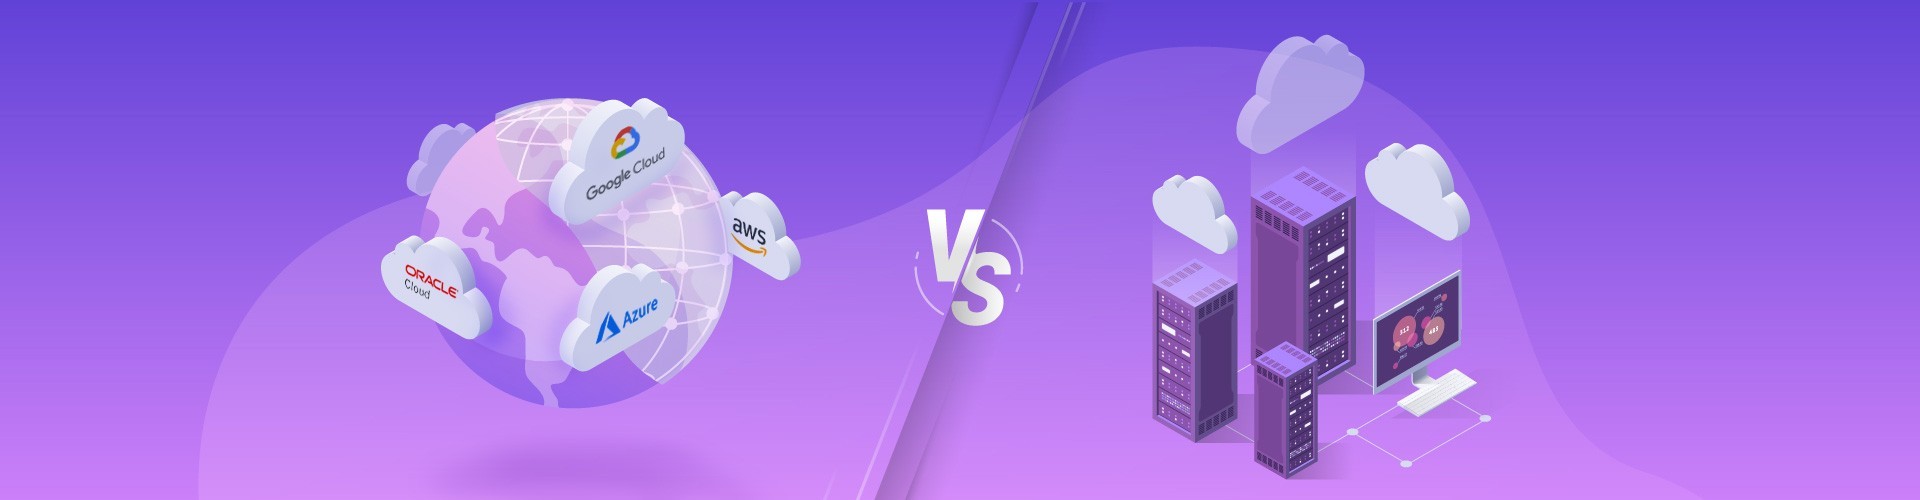 Multi-cloud vs Hybrid cloud: Know the Difference